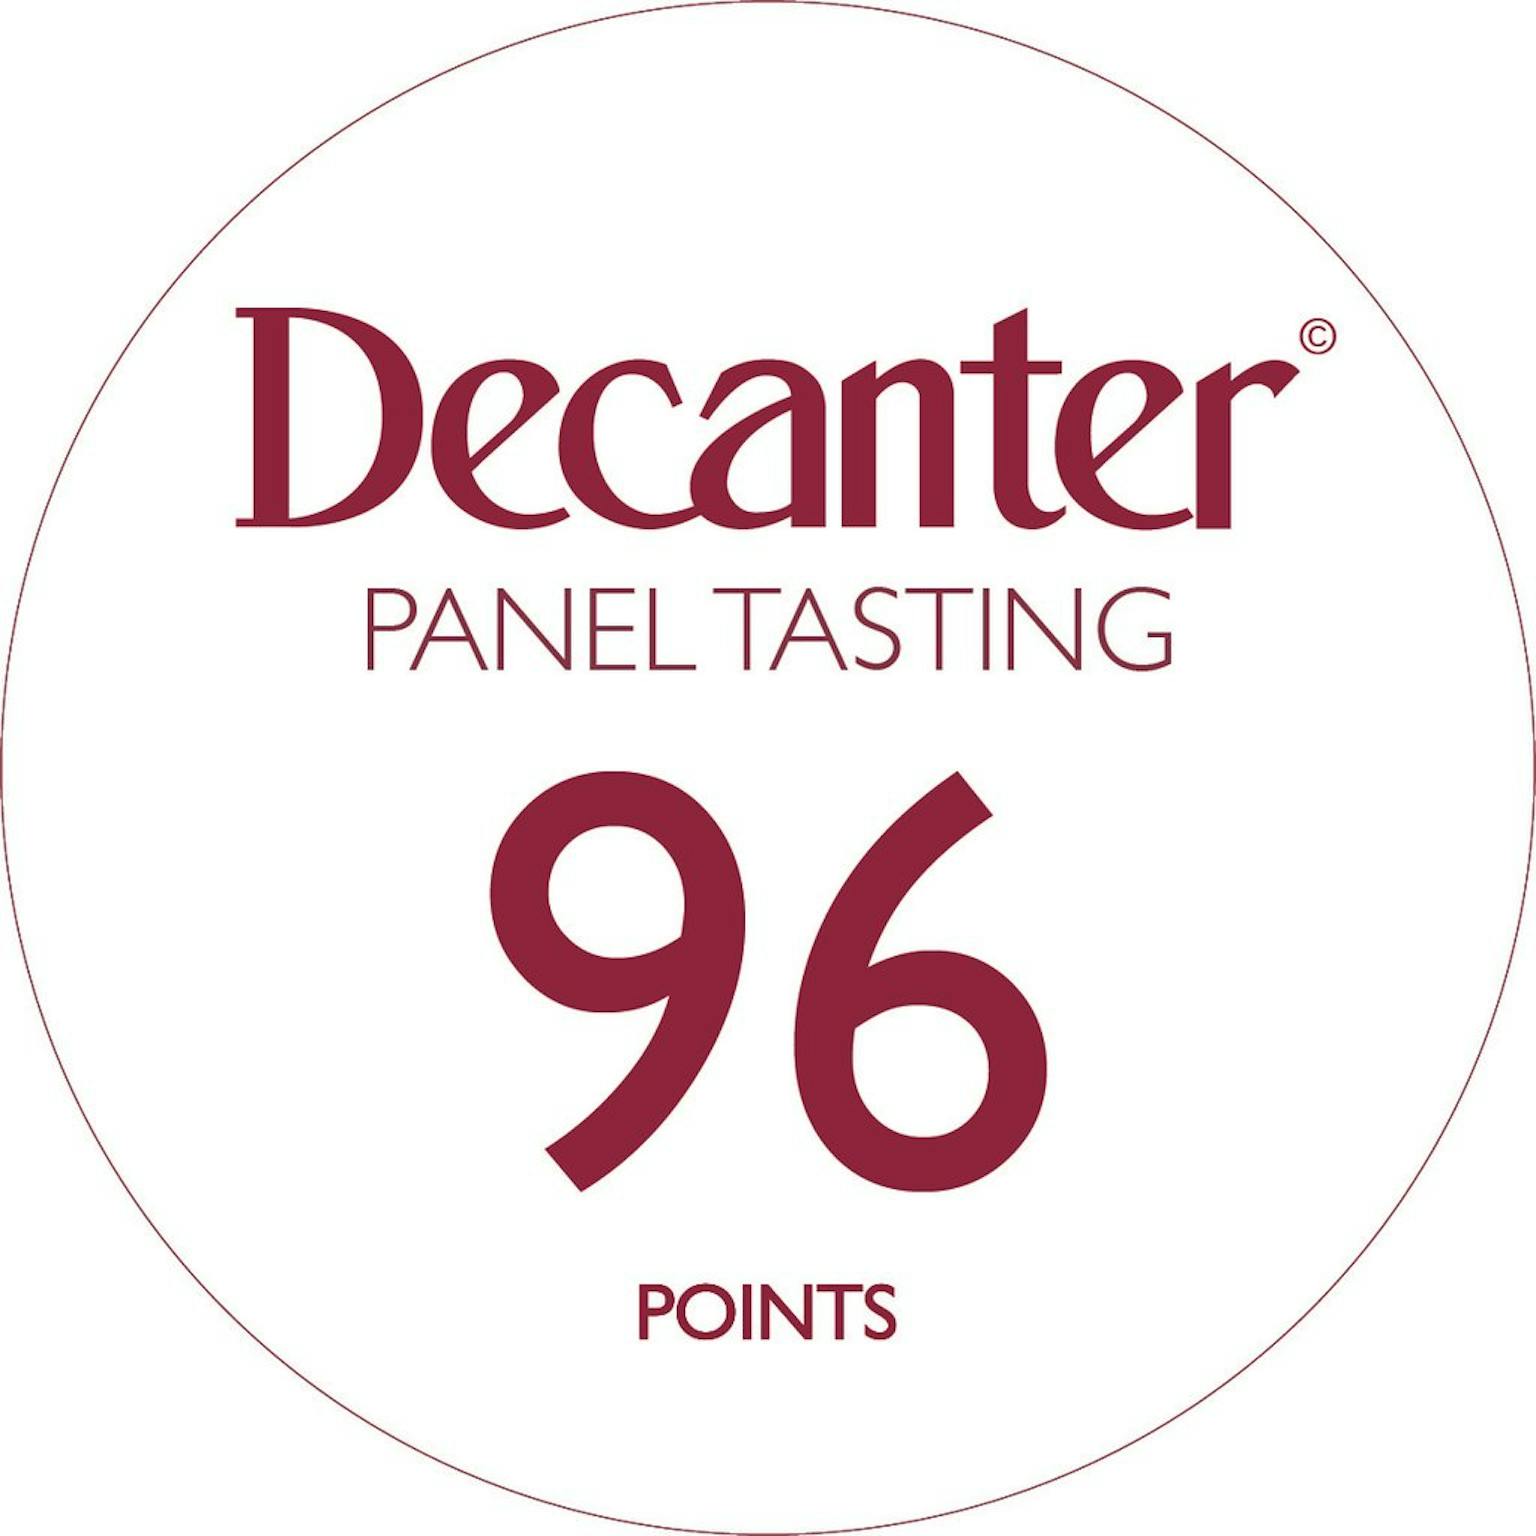 Syrah di Fabbrica has been awarded of 96 points by the English review Decanter, Panel Tasting